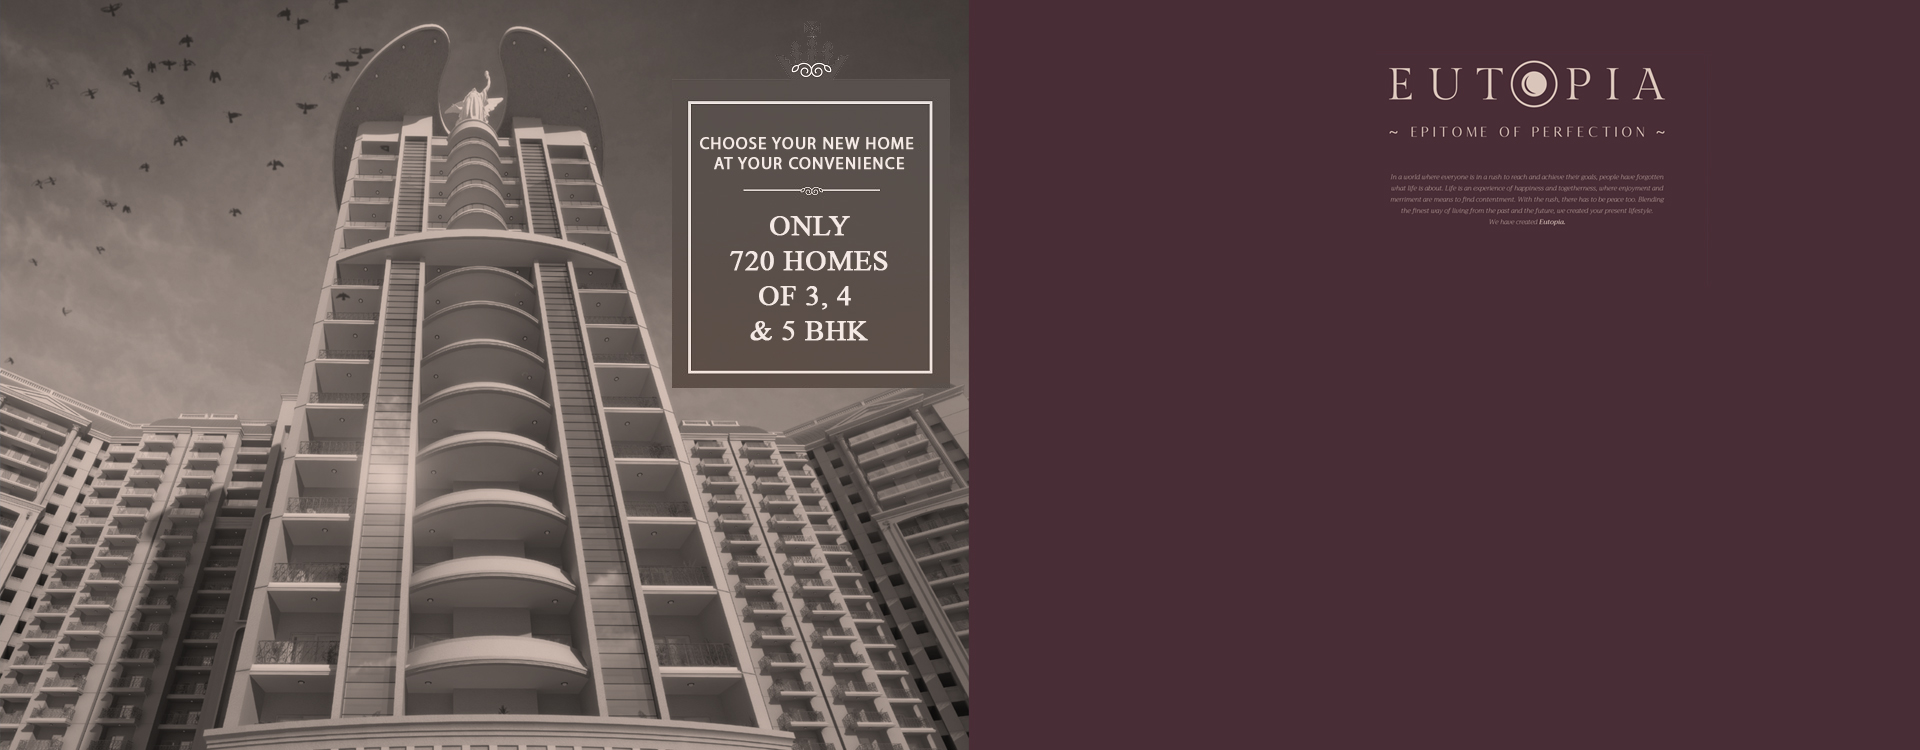 Only 720 homes of 3, 4 and 5 BHK at T and T Eutopia in Siddharth Vihar, Ghaziabad